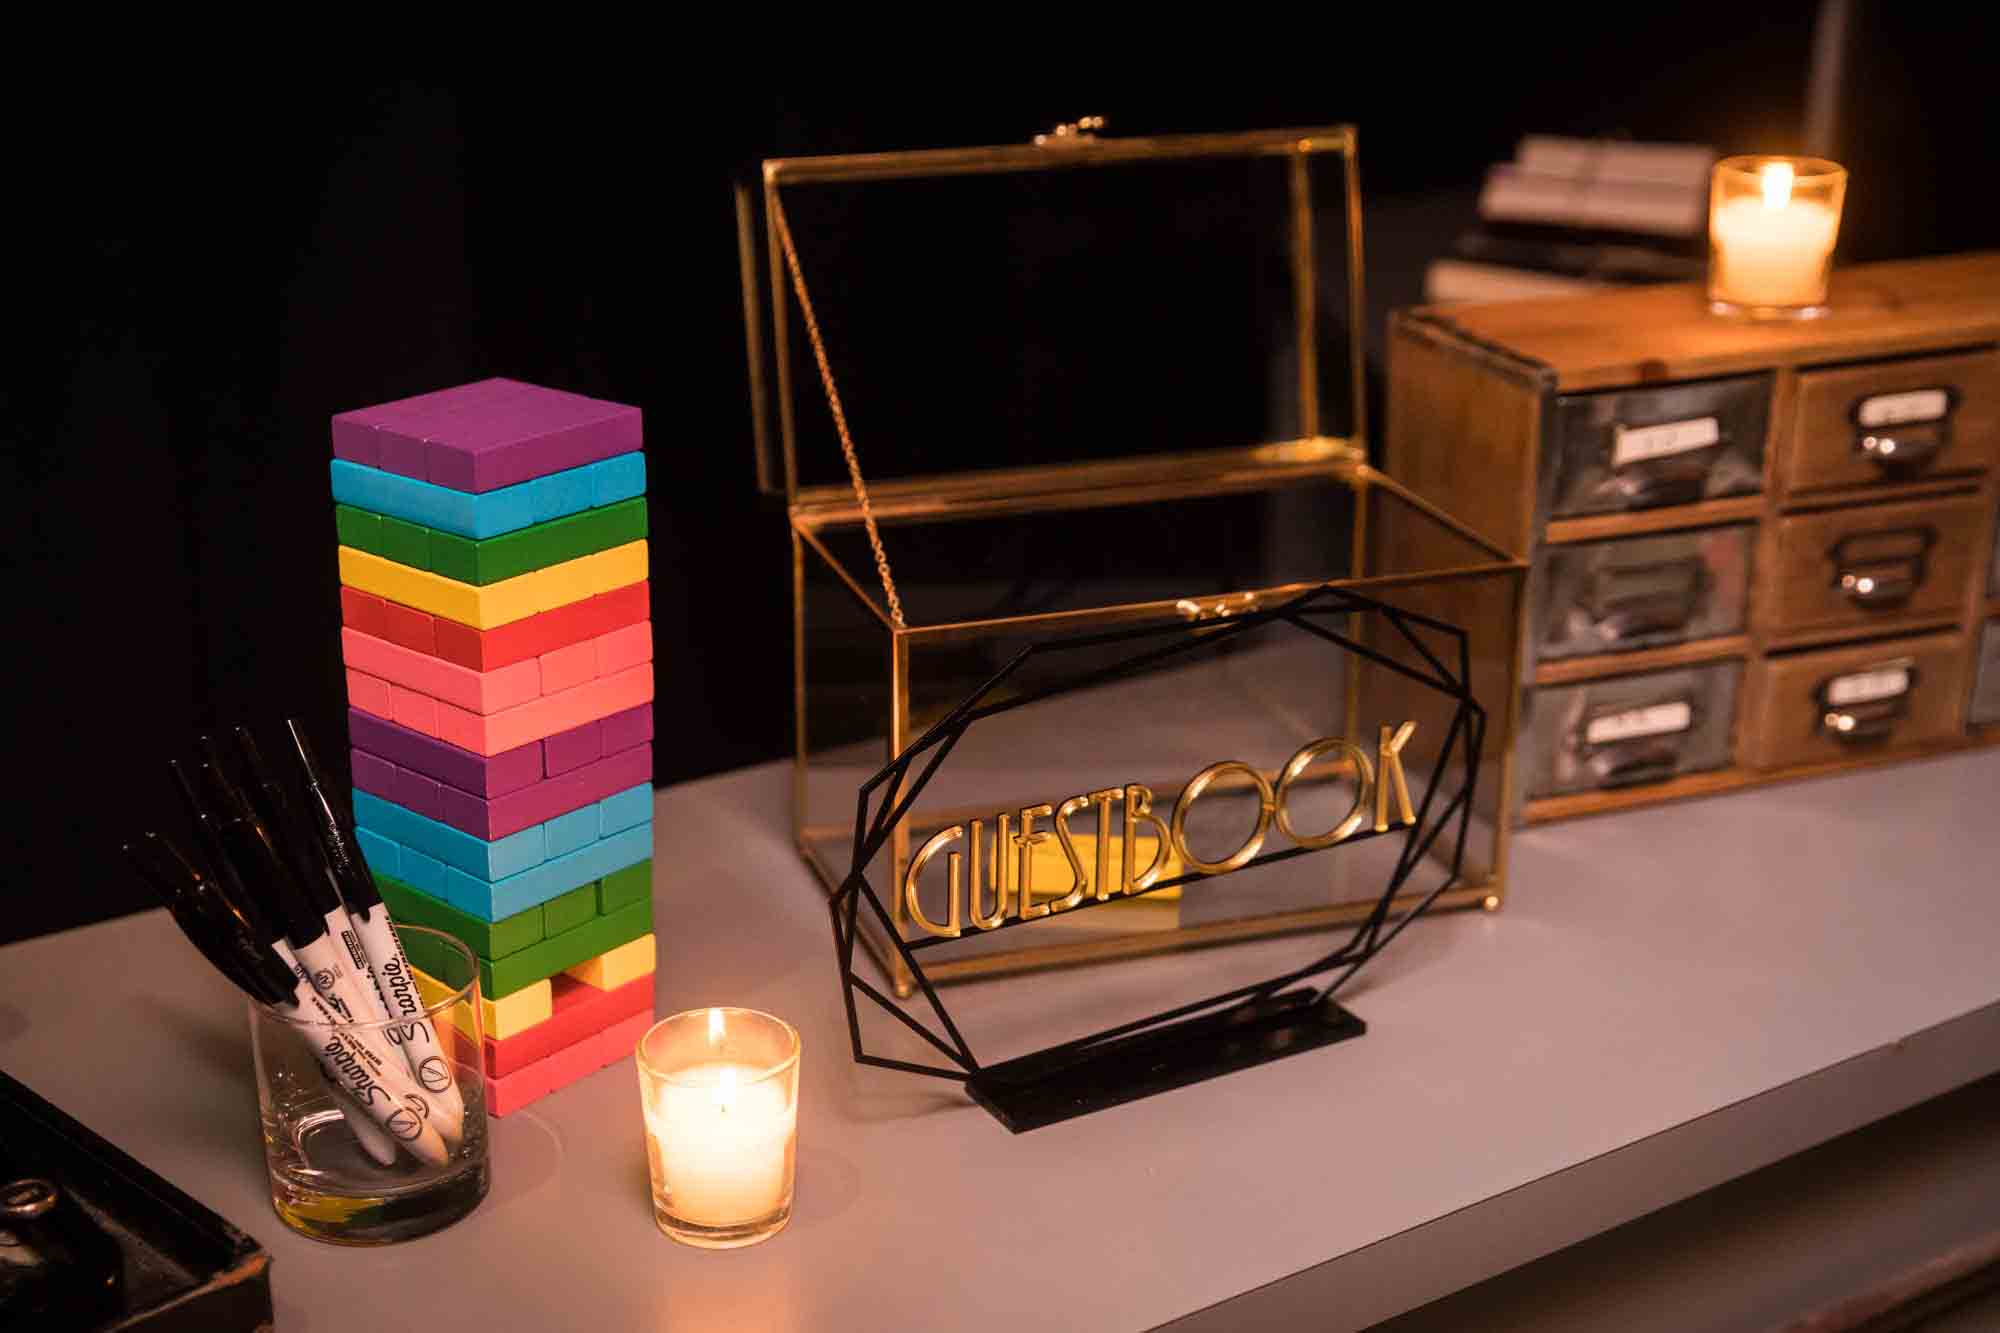 Jenga guest book with colorful blocks and candle